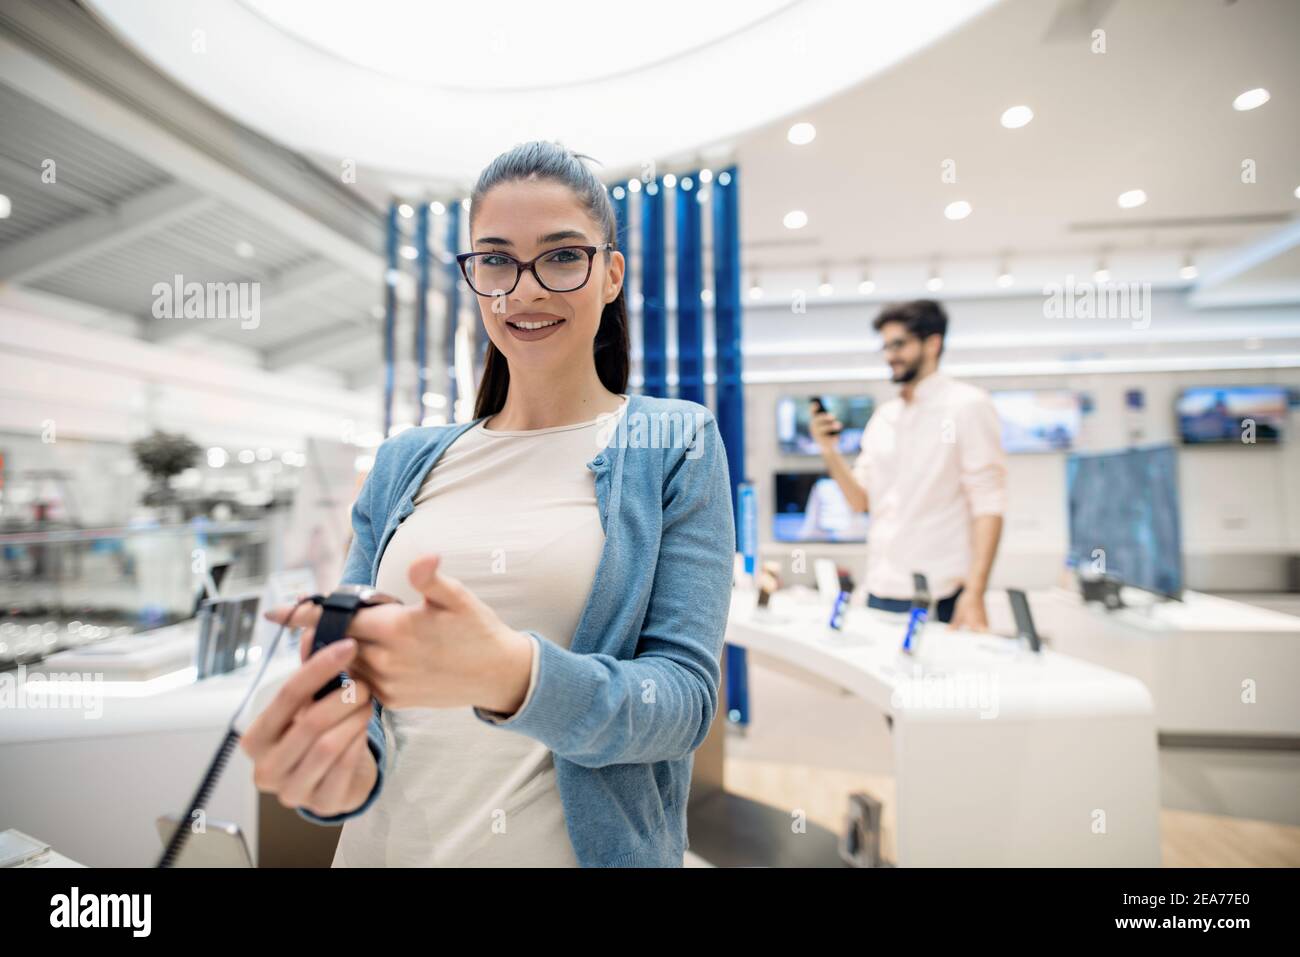 Woman holding in hands smart watch while standing in tech store and looking in camera. Stock Photo